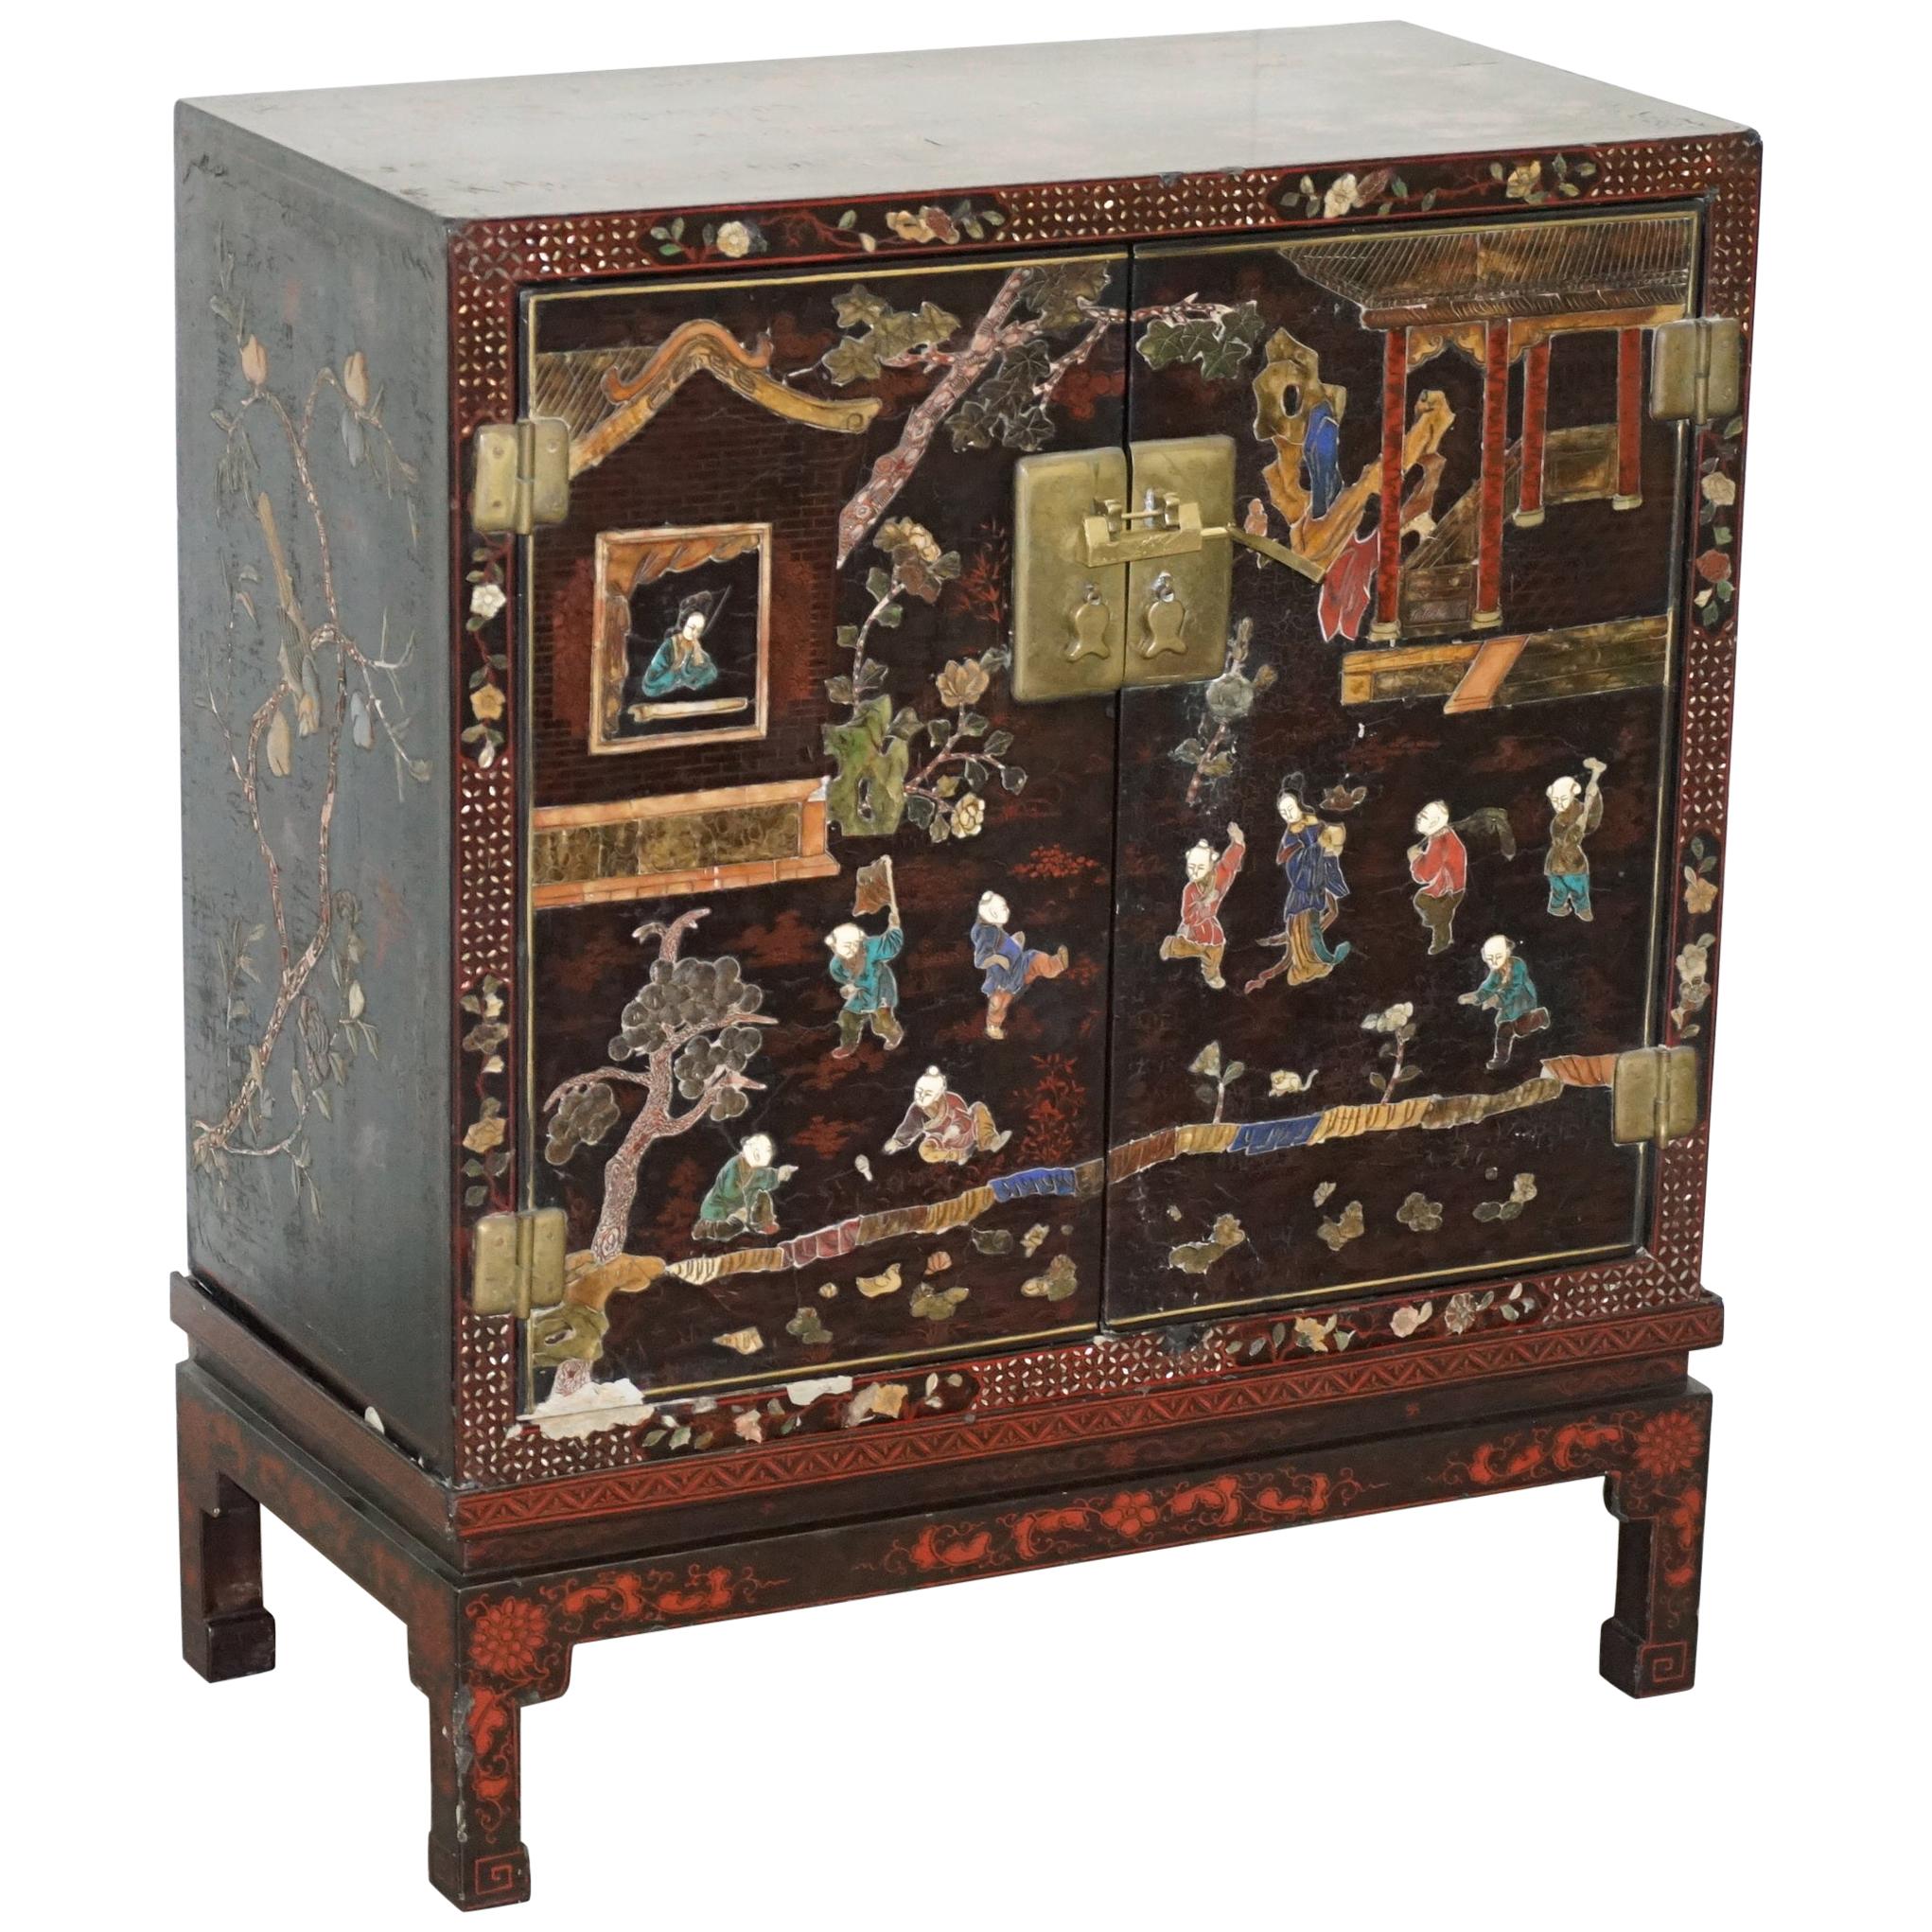 19th Century Mother of Pearl Inlaid Chinese Lacquer Brass Engraved Cabinet Chest